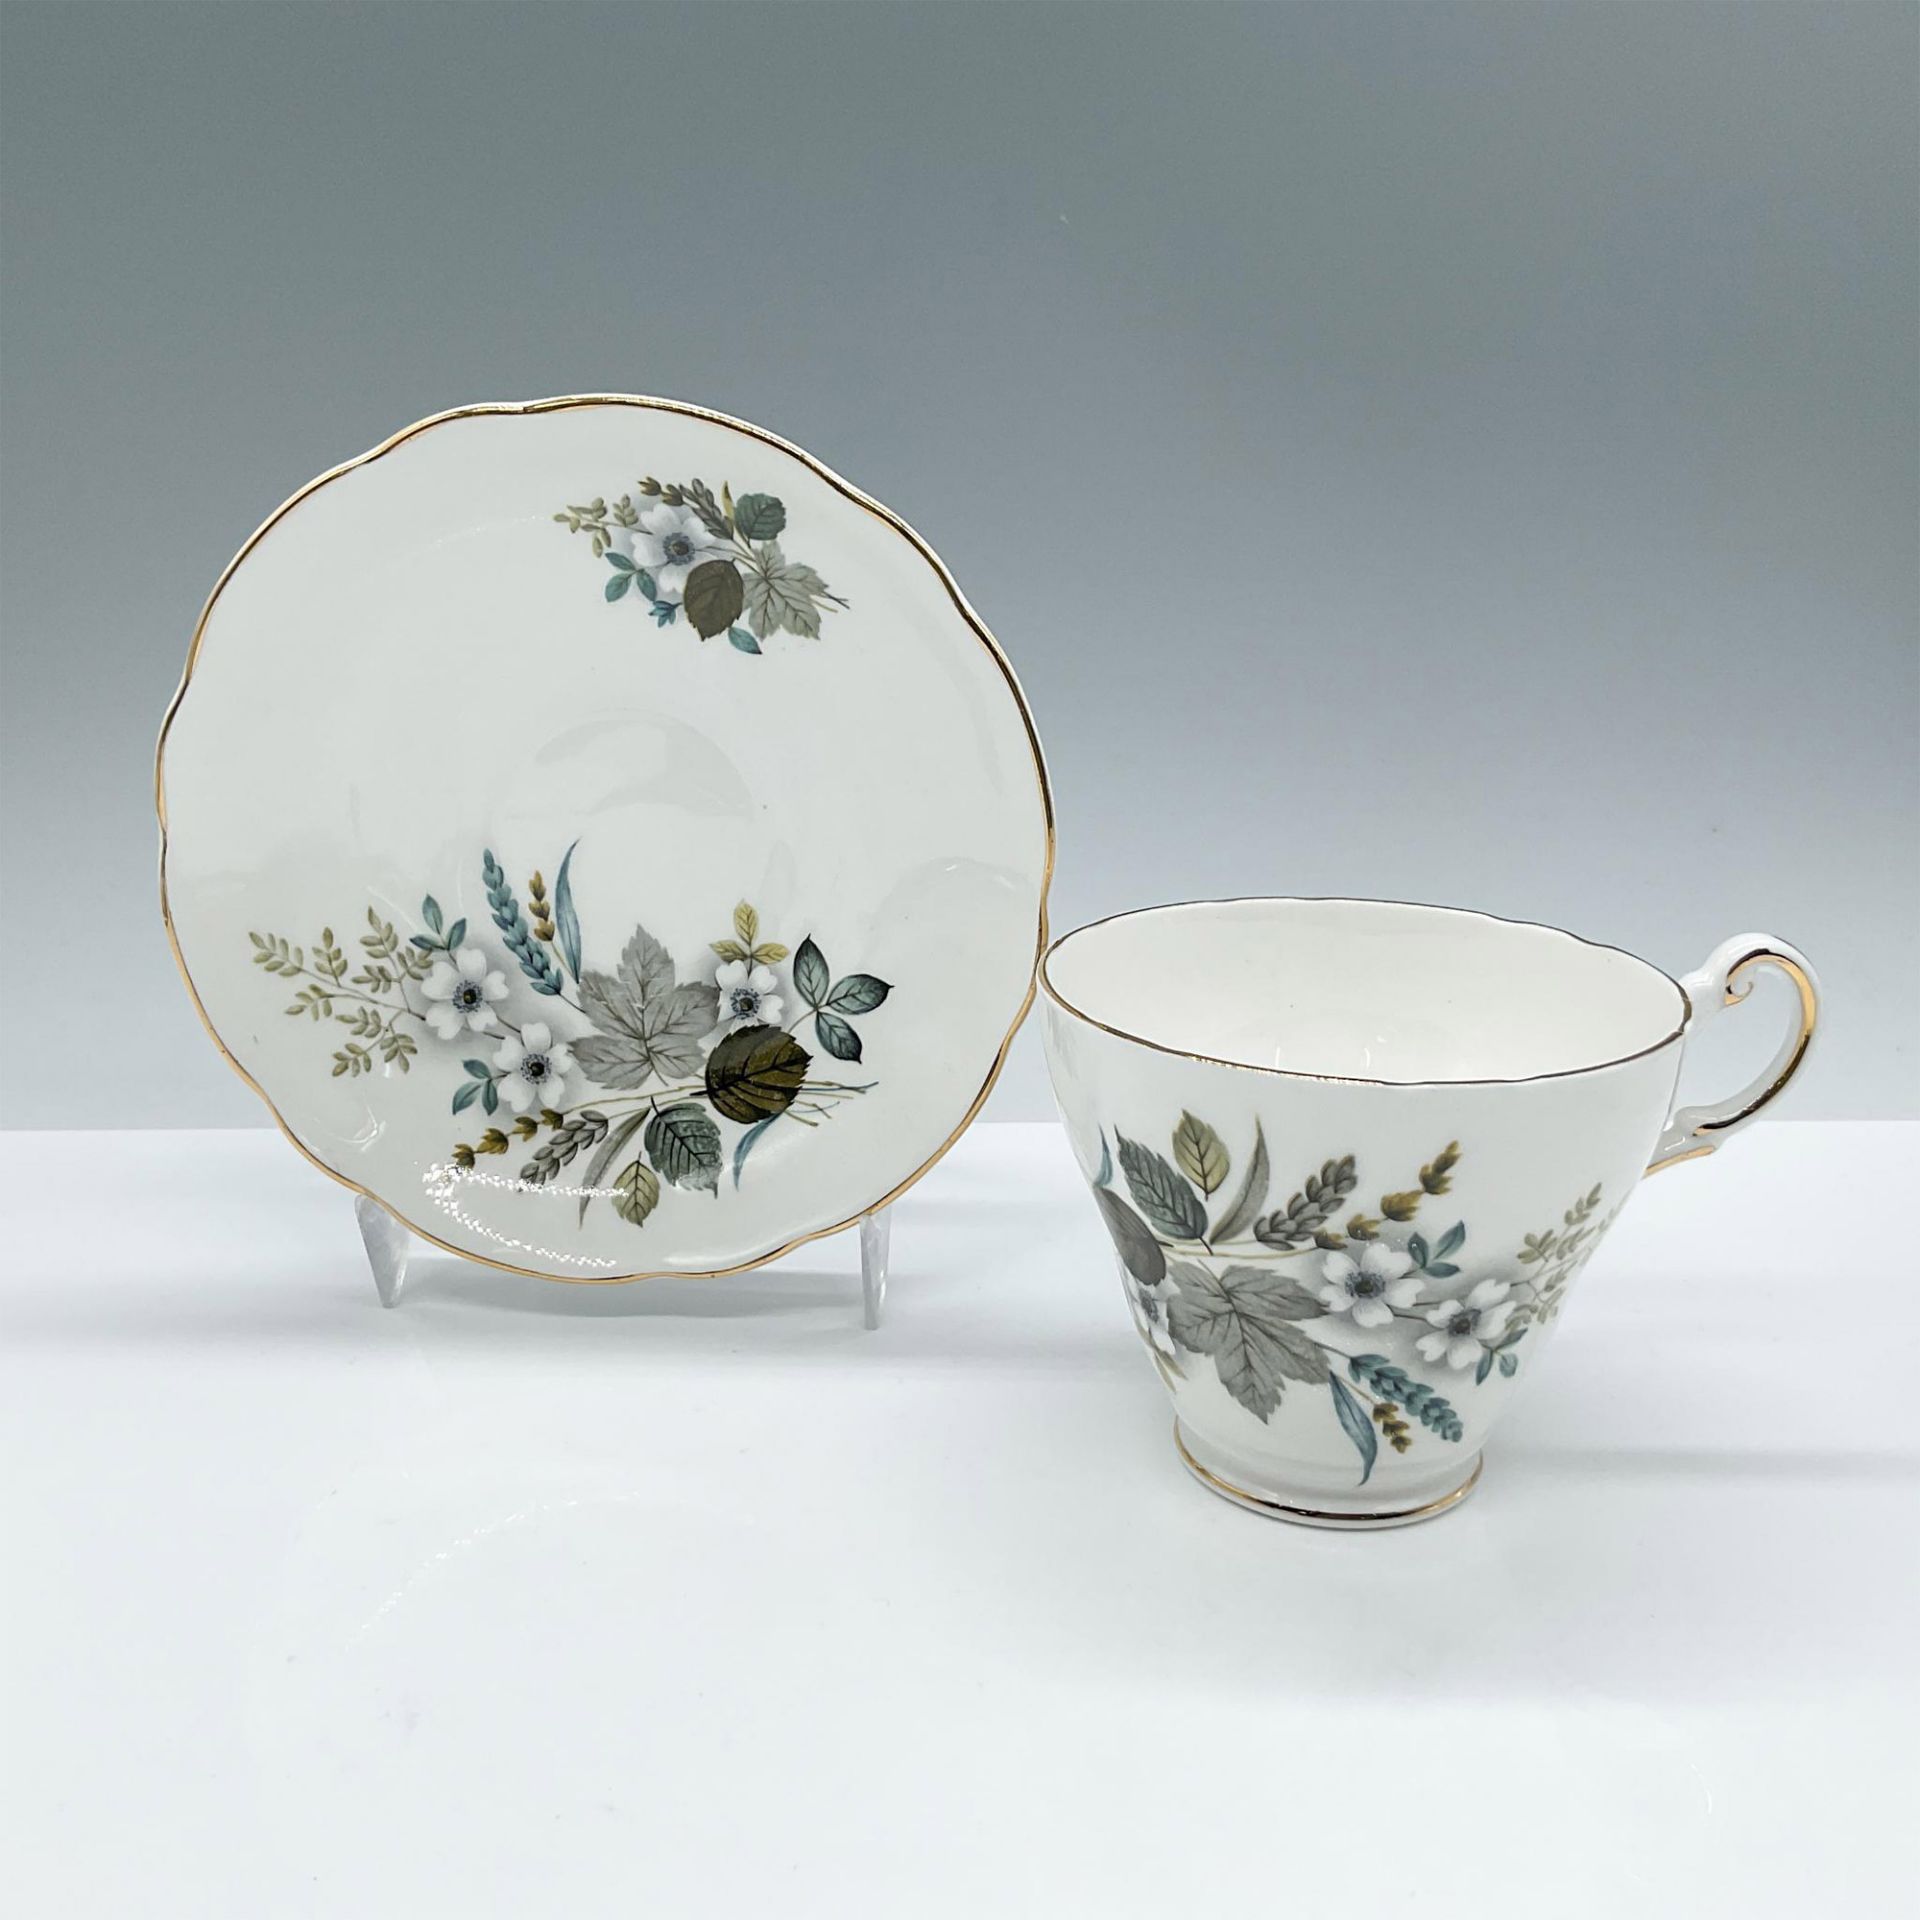 Regency Bone China Tea Cup and Saucer - Image 3 of 4